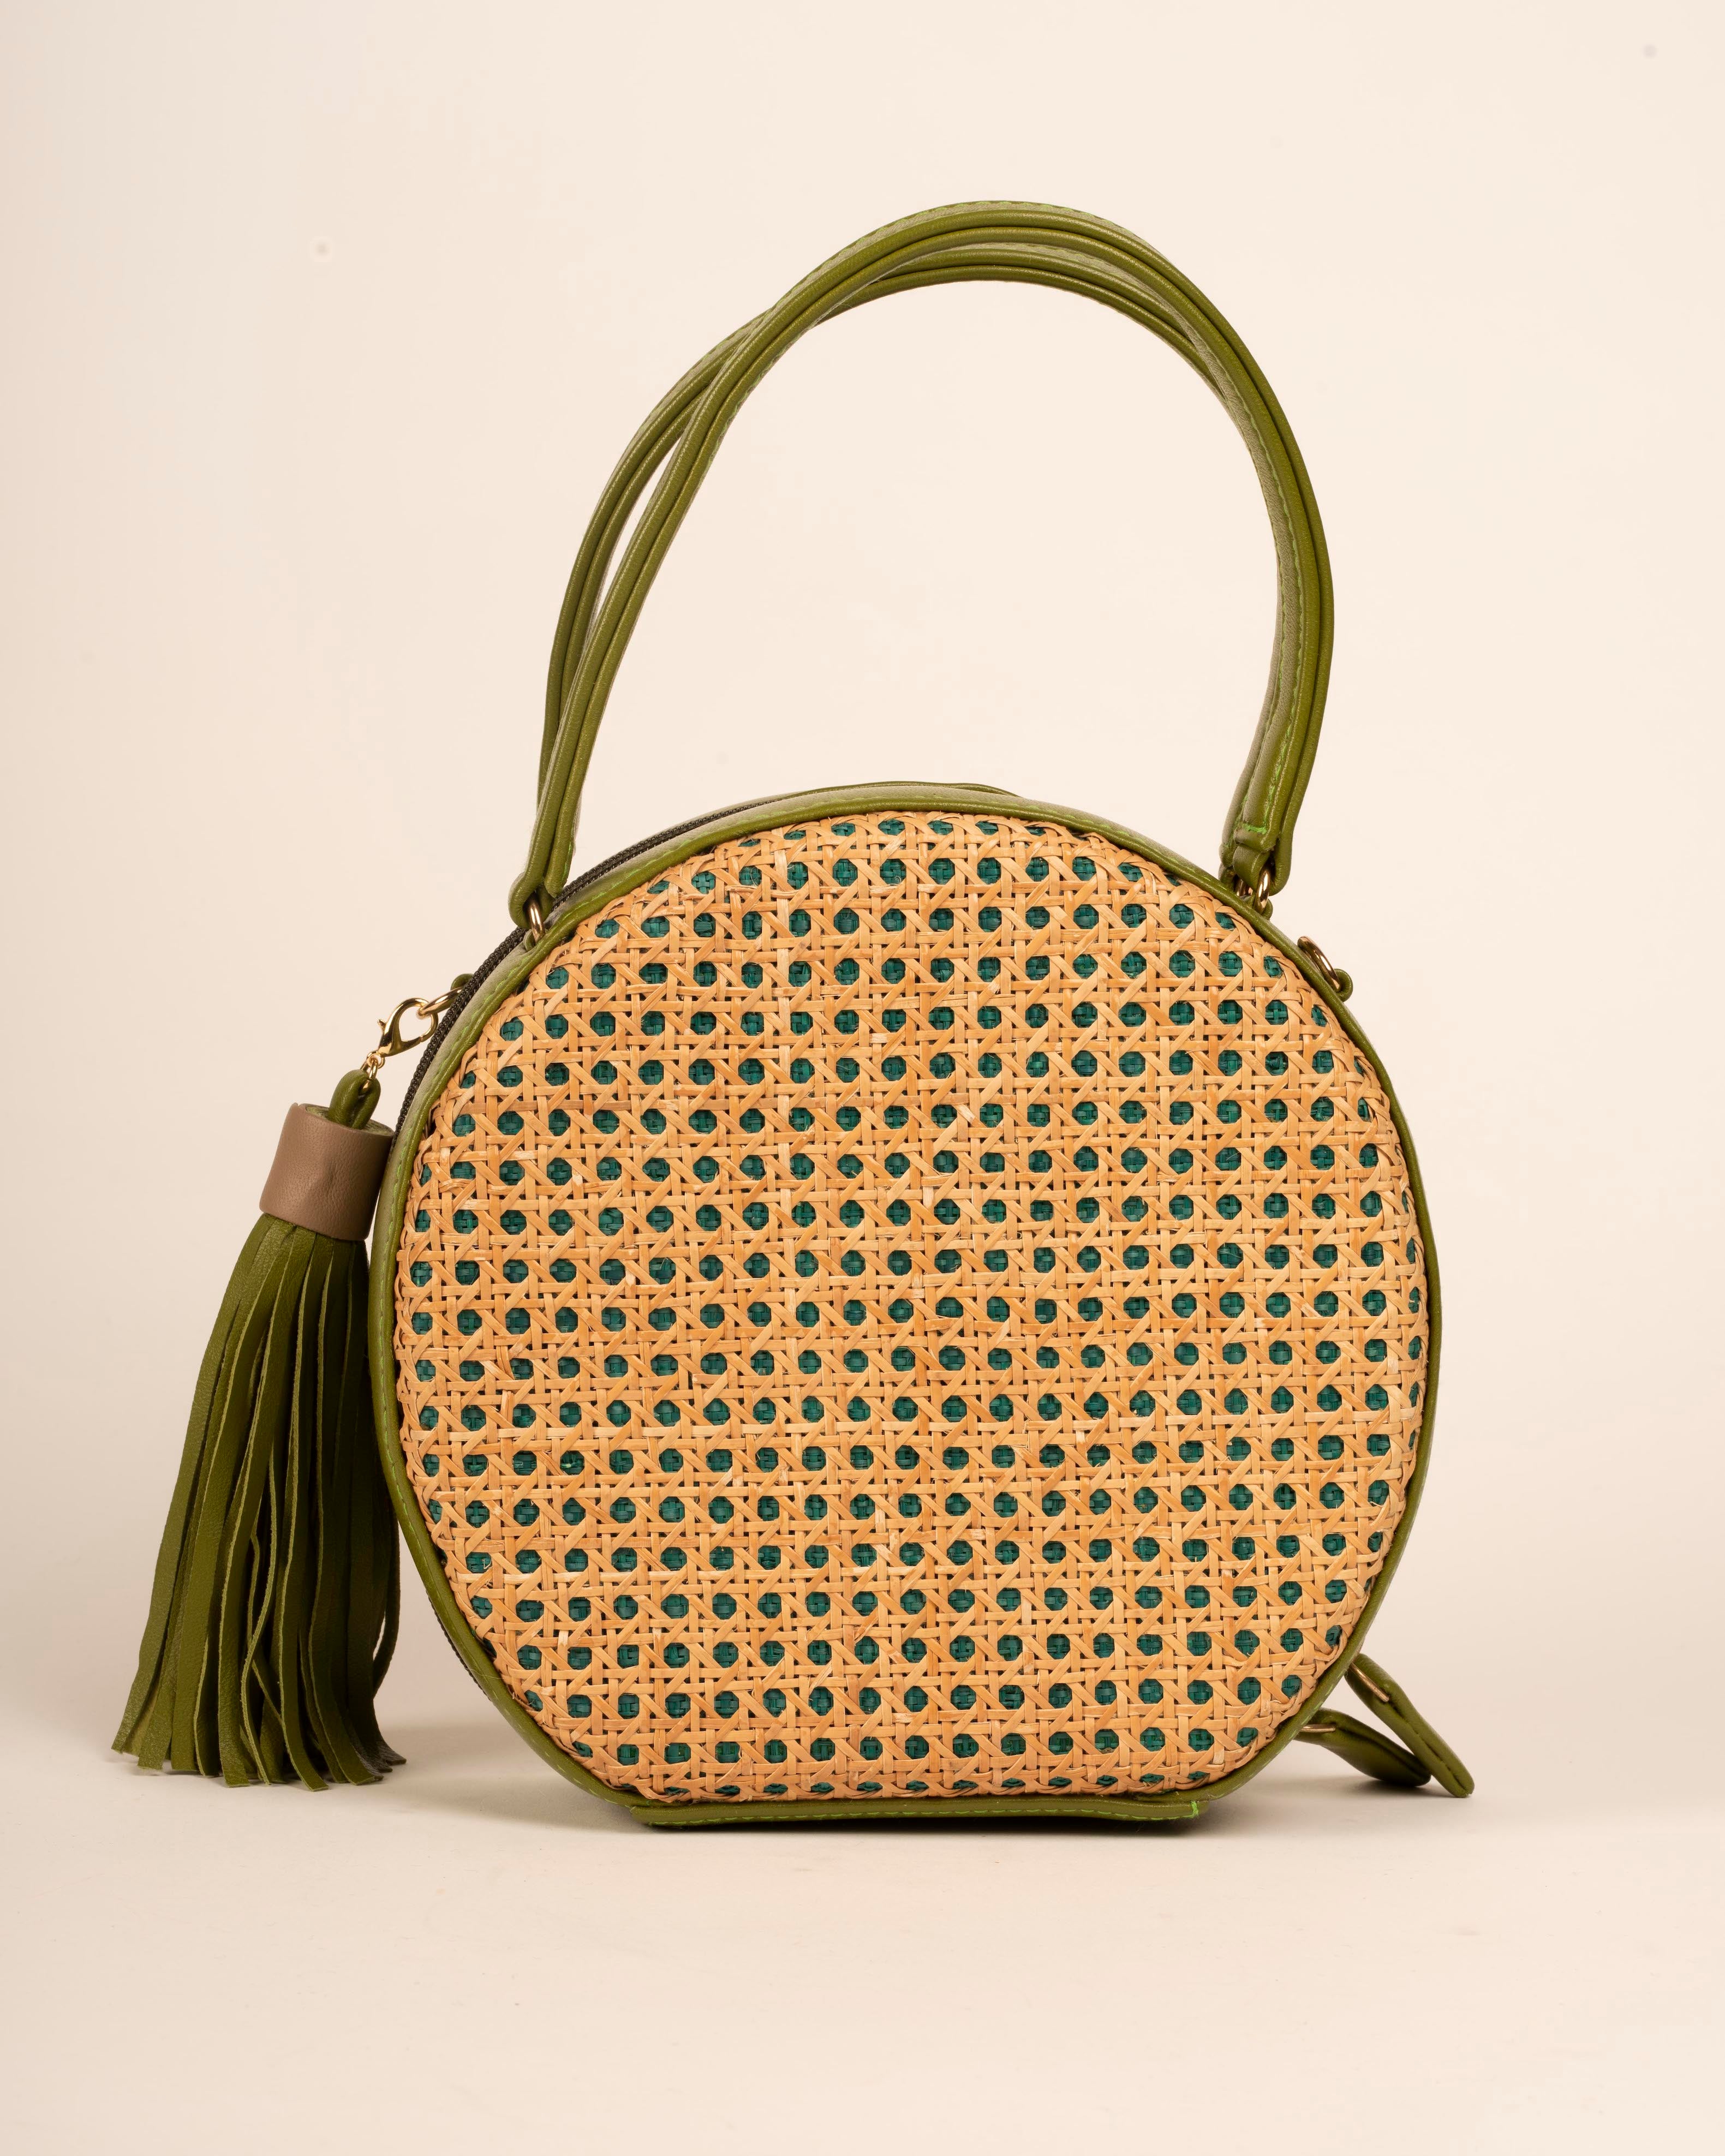 ILHA Francesca purse in Olive,  front facing